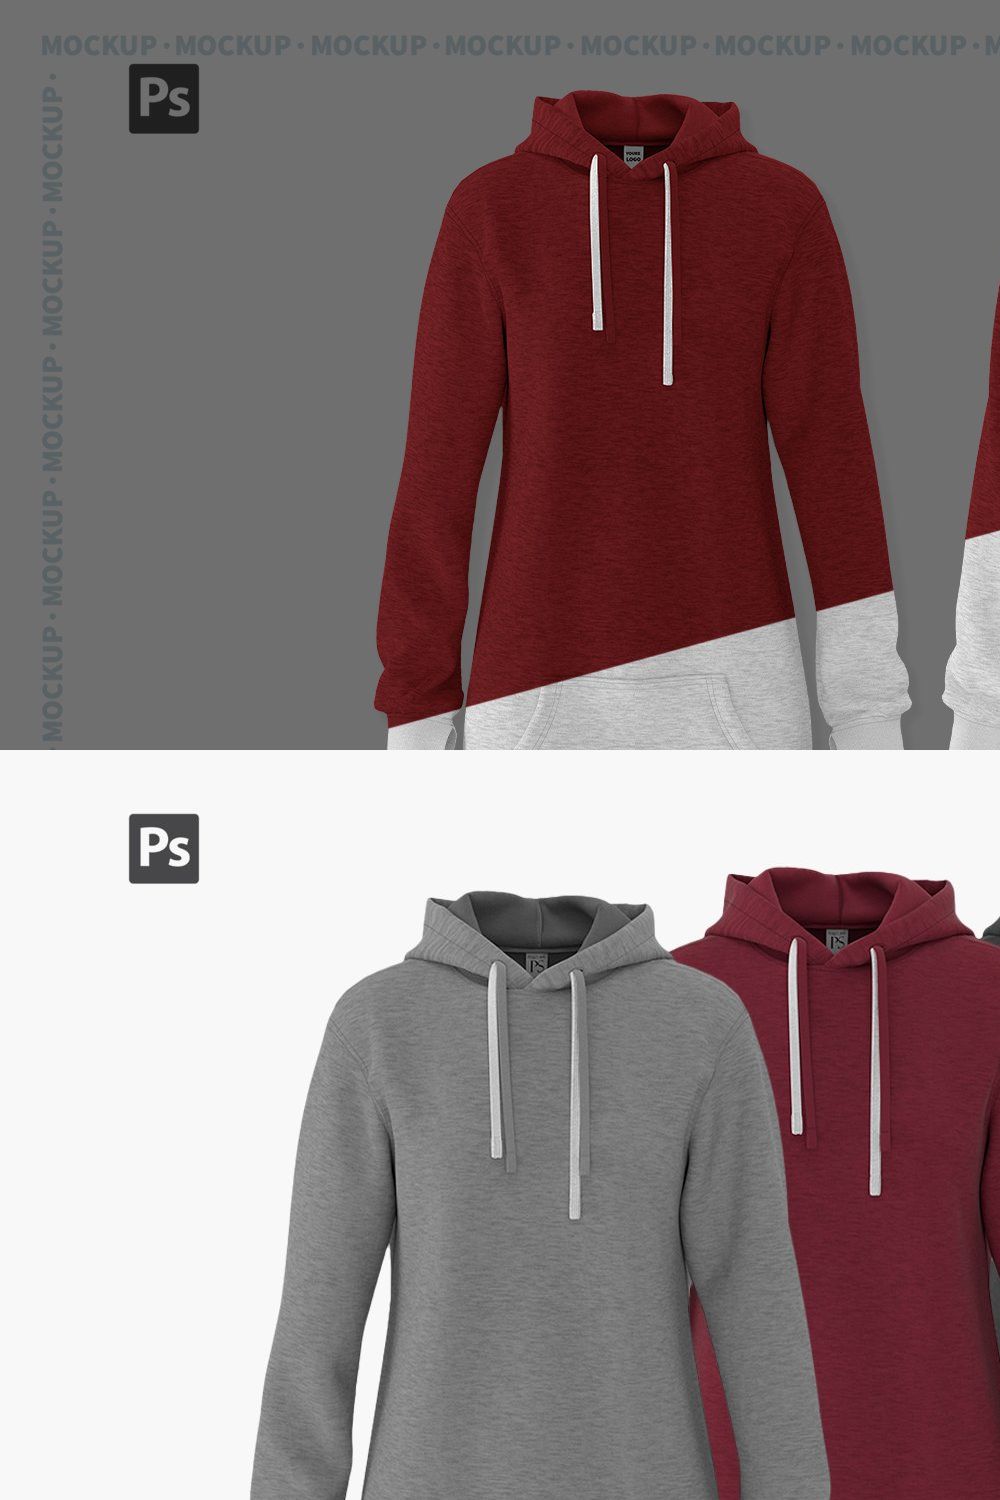 Hooded pullover dress mockup. pinterest preview image.